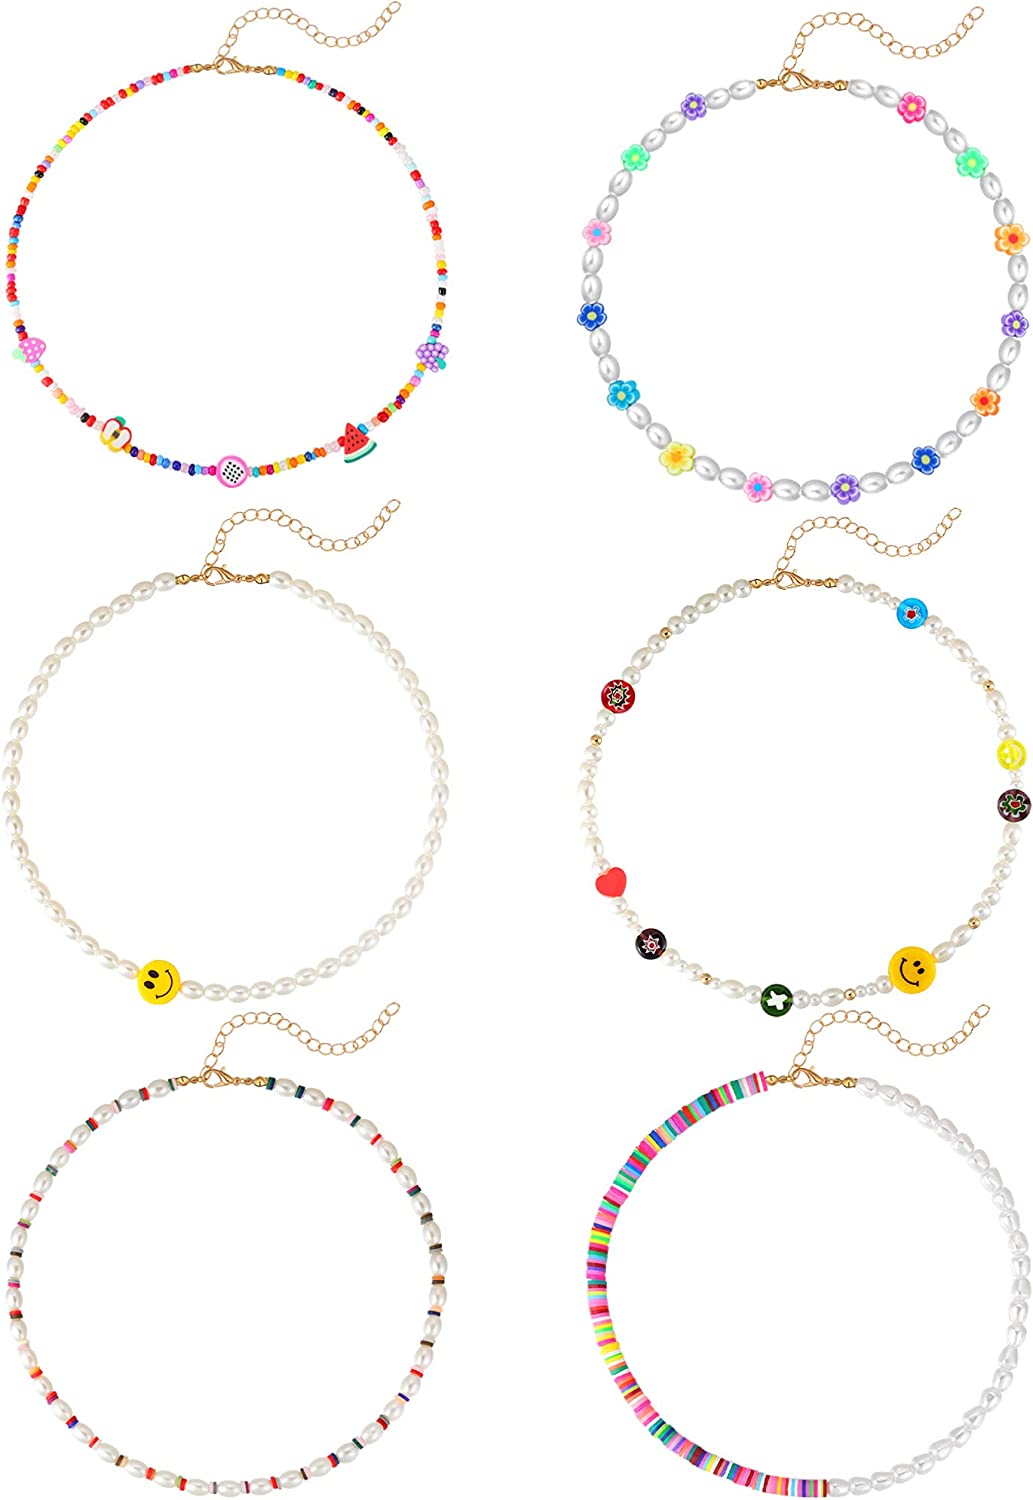 TOSGMY 6Pcs Beaded Choker Necklace for Women Girls Y2K Necklace Handmade Smiley Face Beads Necklace Set Flowers Pearl